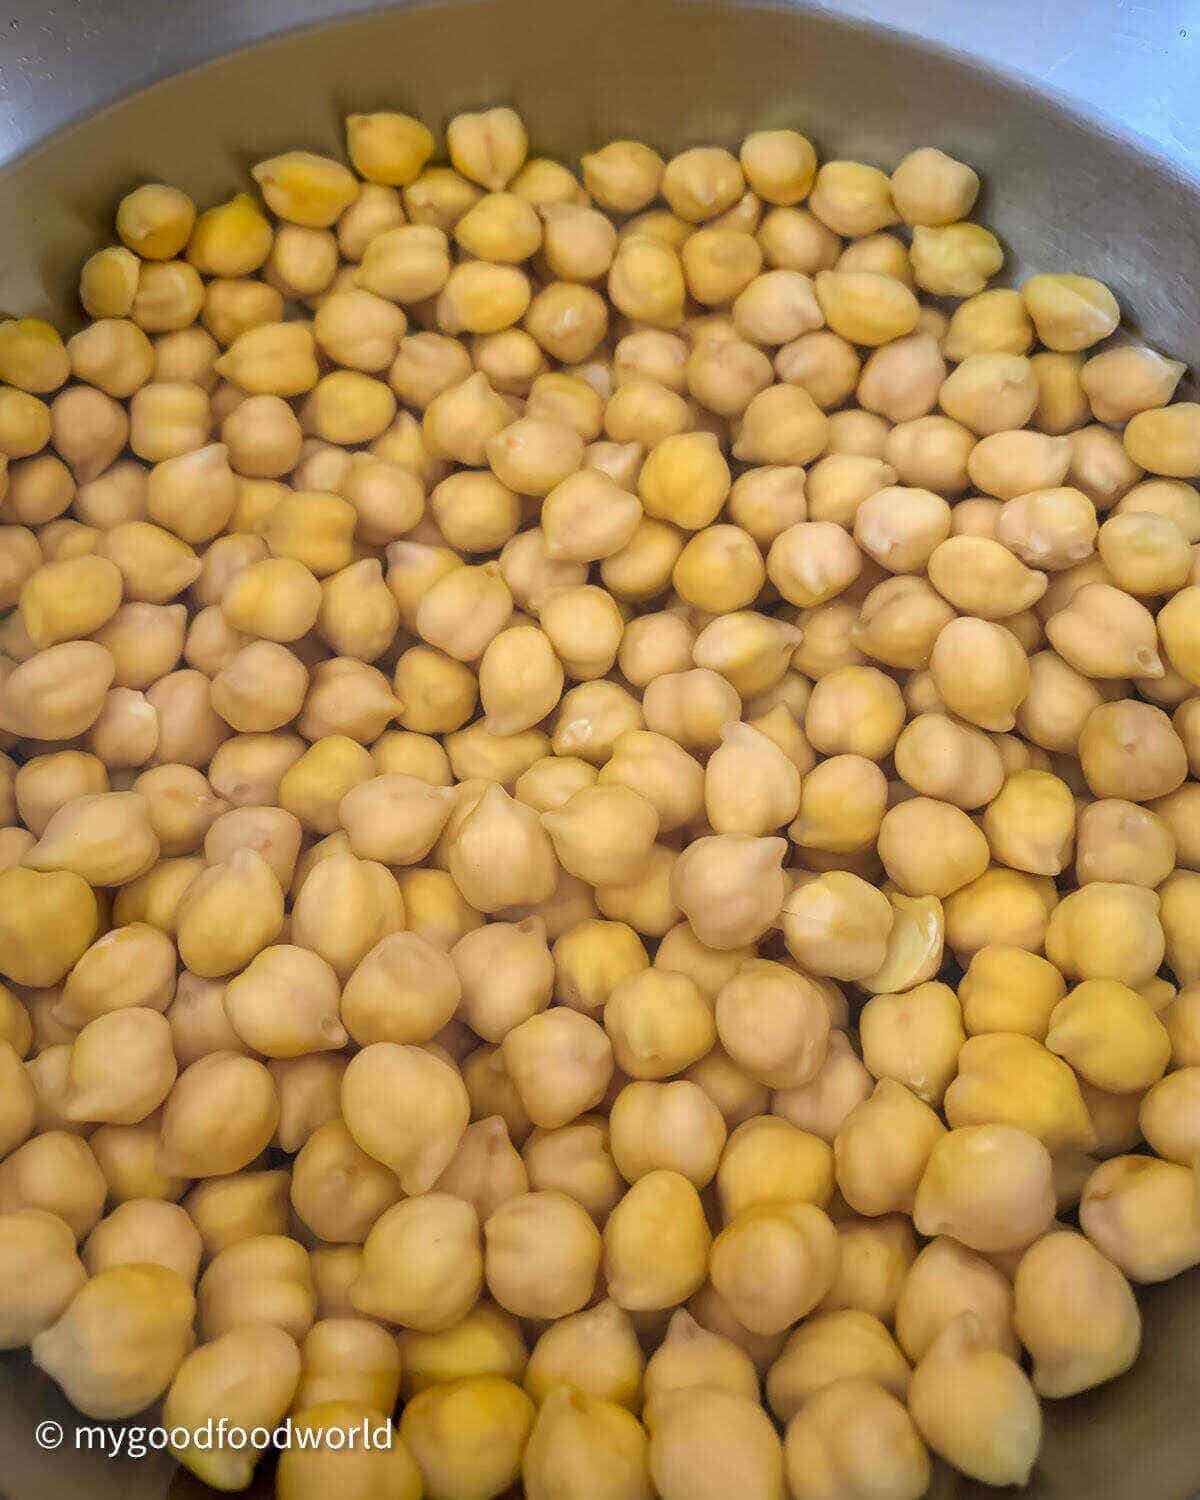 Garbanzo beans soaking in water in a wide bowl.